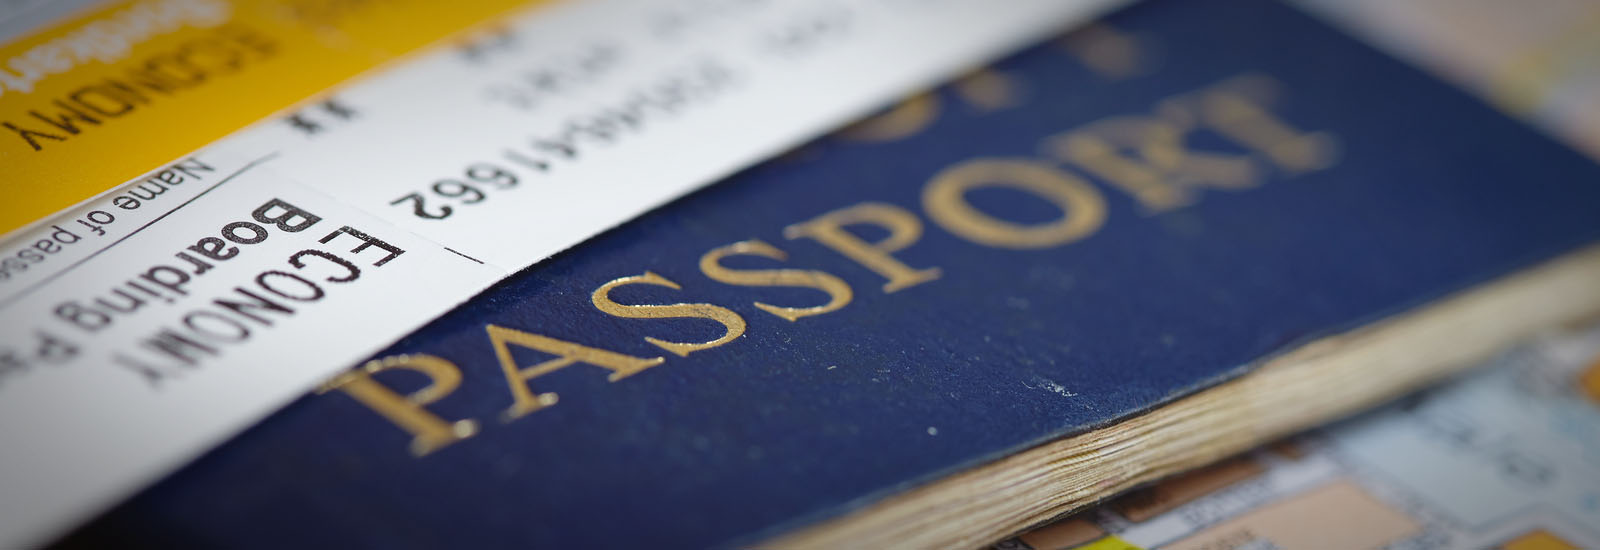 Close up of passport and boarding pass